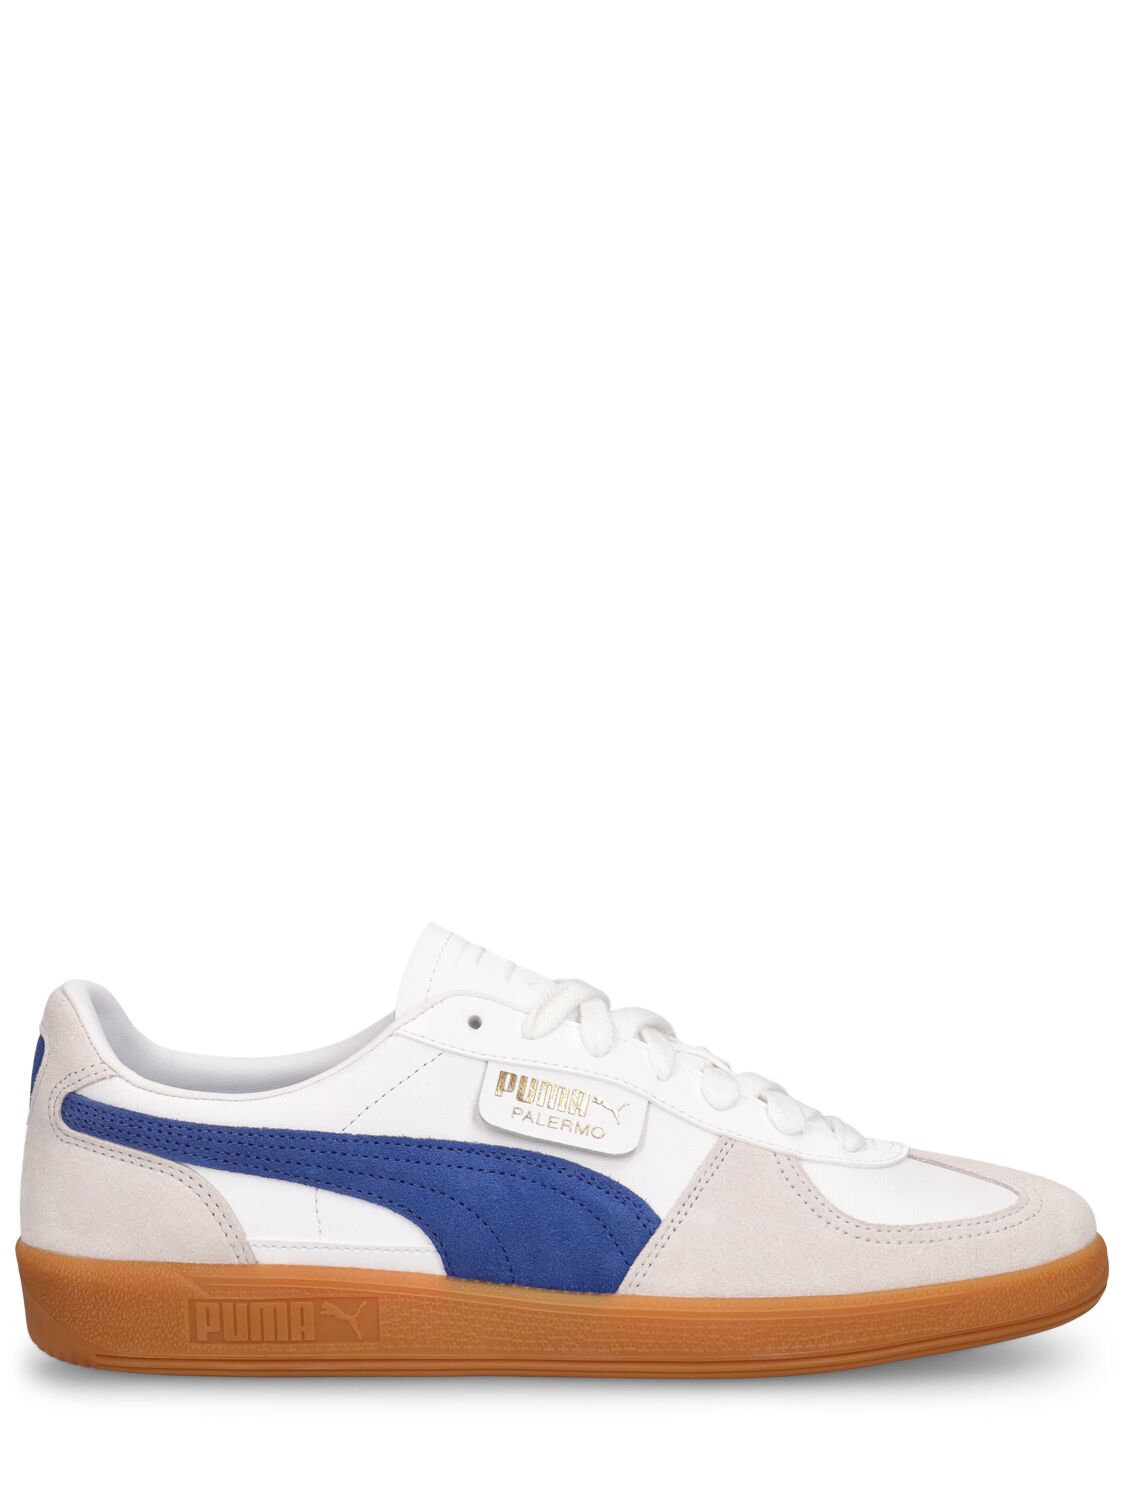 Puma Palermo Sneakers In Clyde Royal